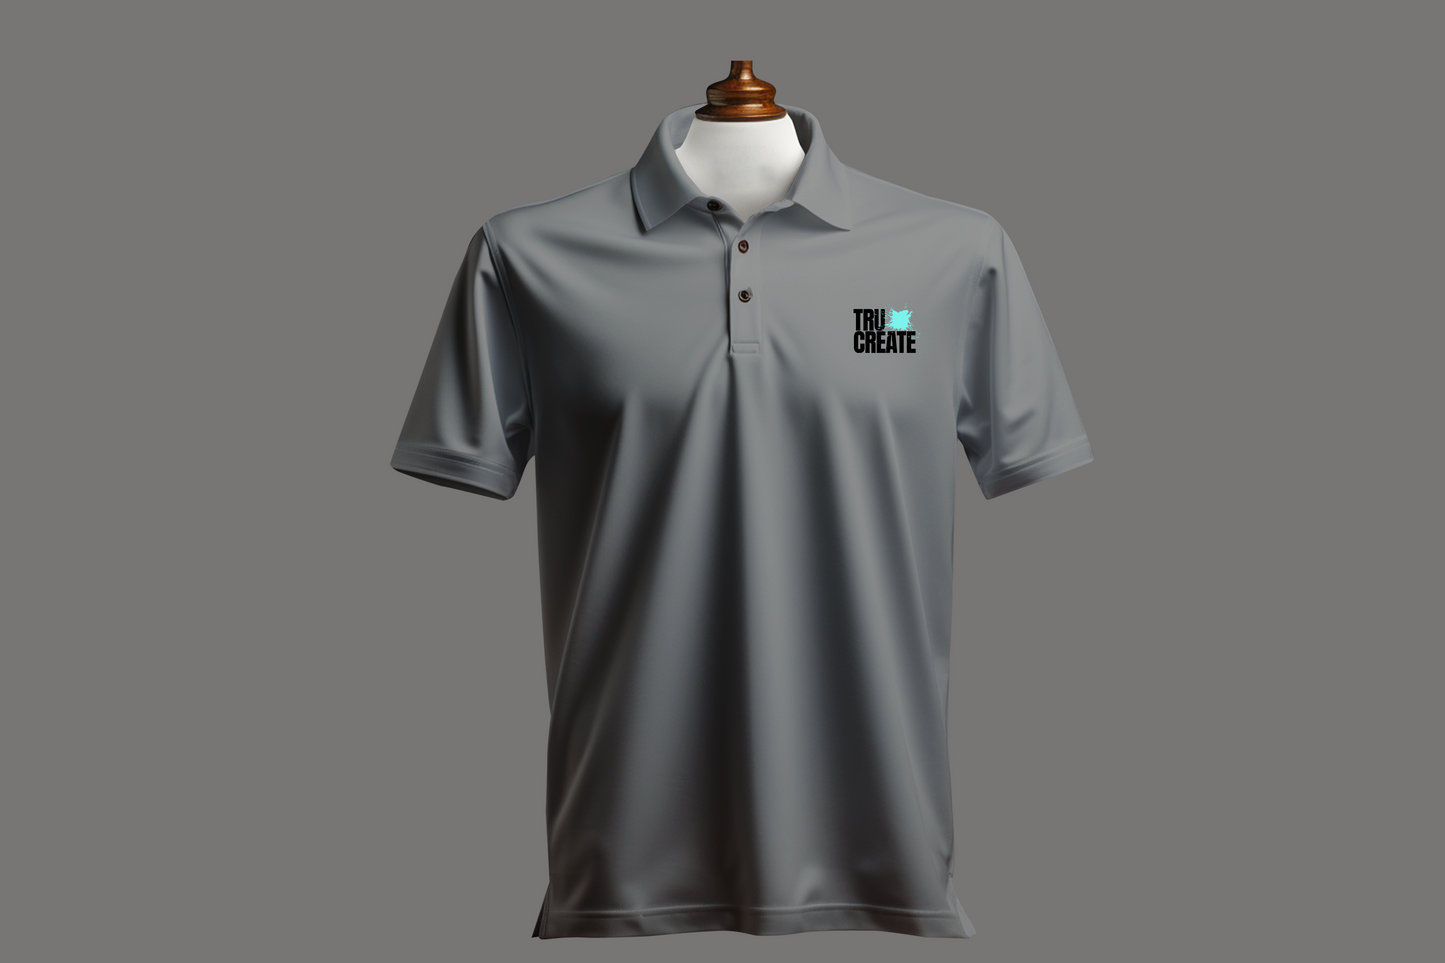 Custom Embroidered Polos - Sports